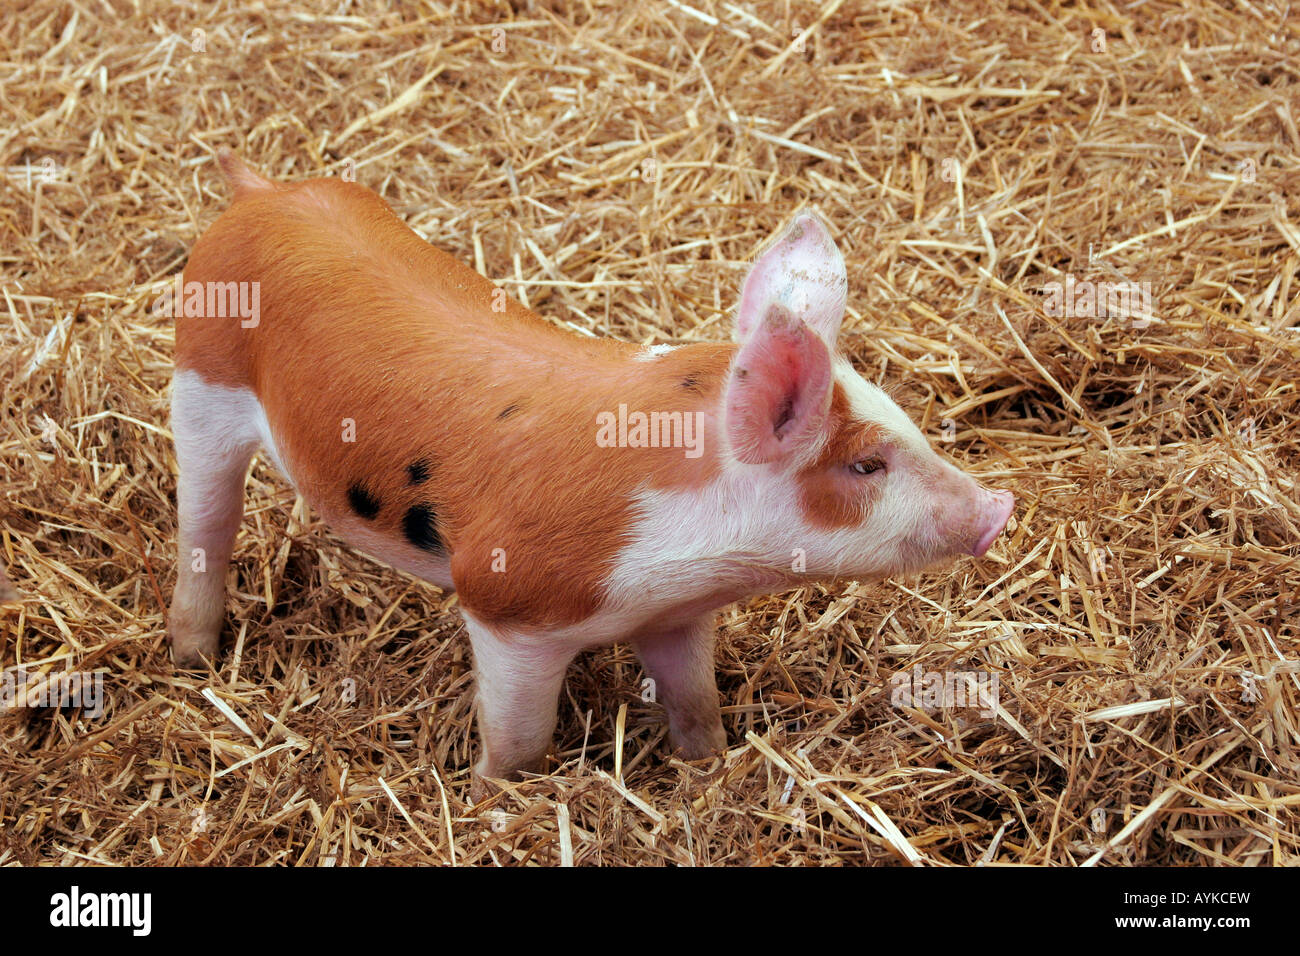 Little pig on a straw carpet. Stock Photo